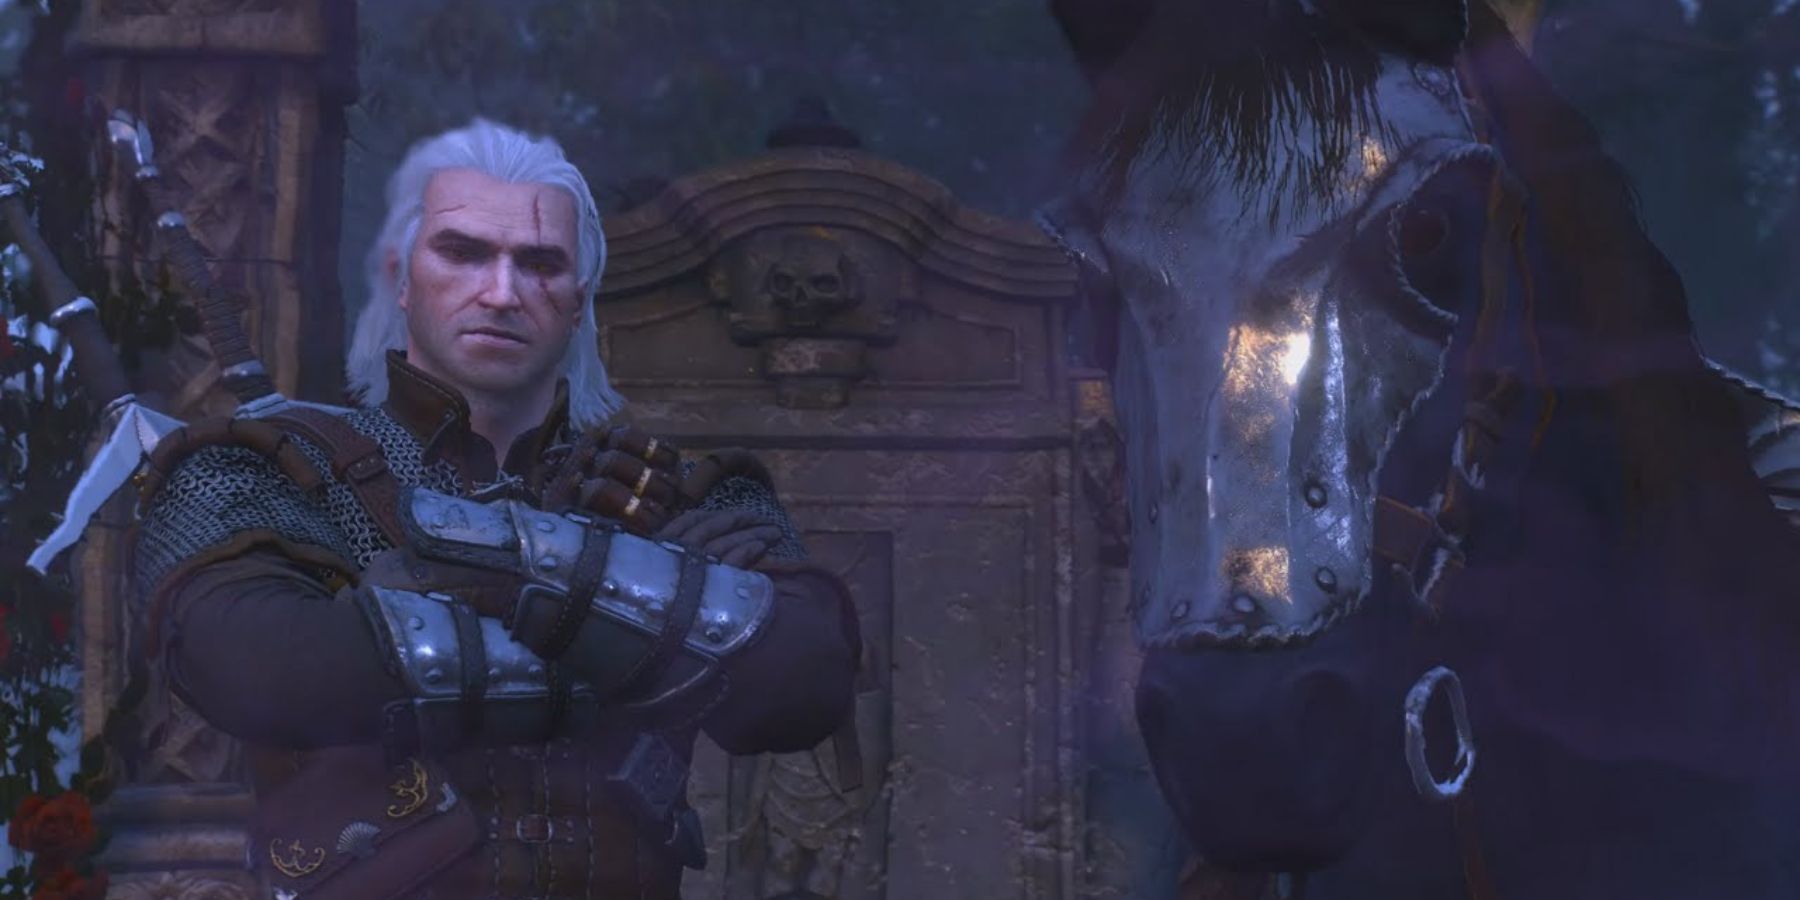 Geralt and Roach looking at the camera